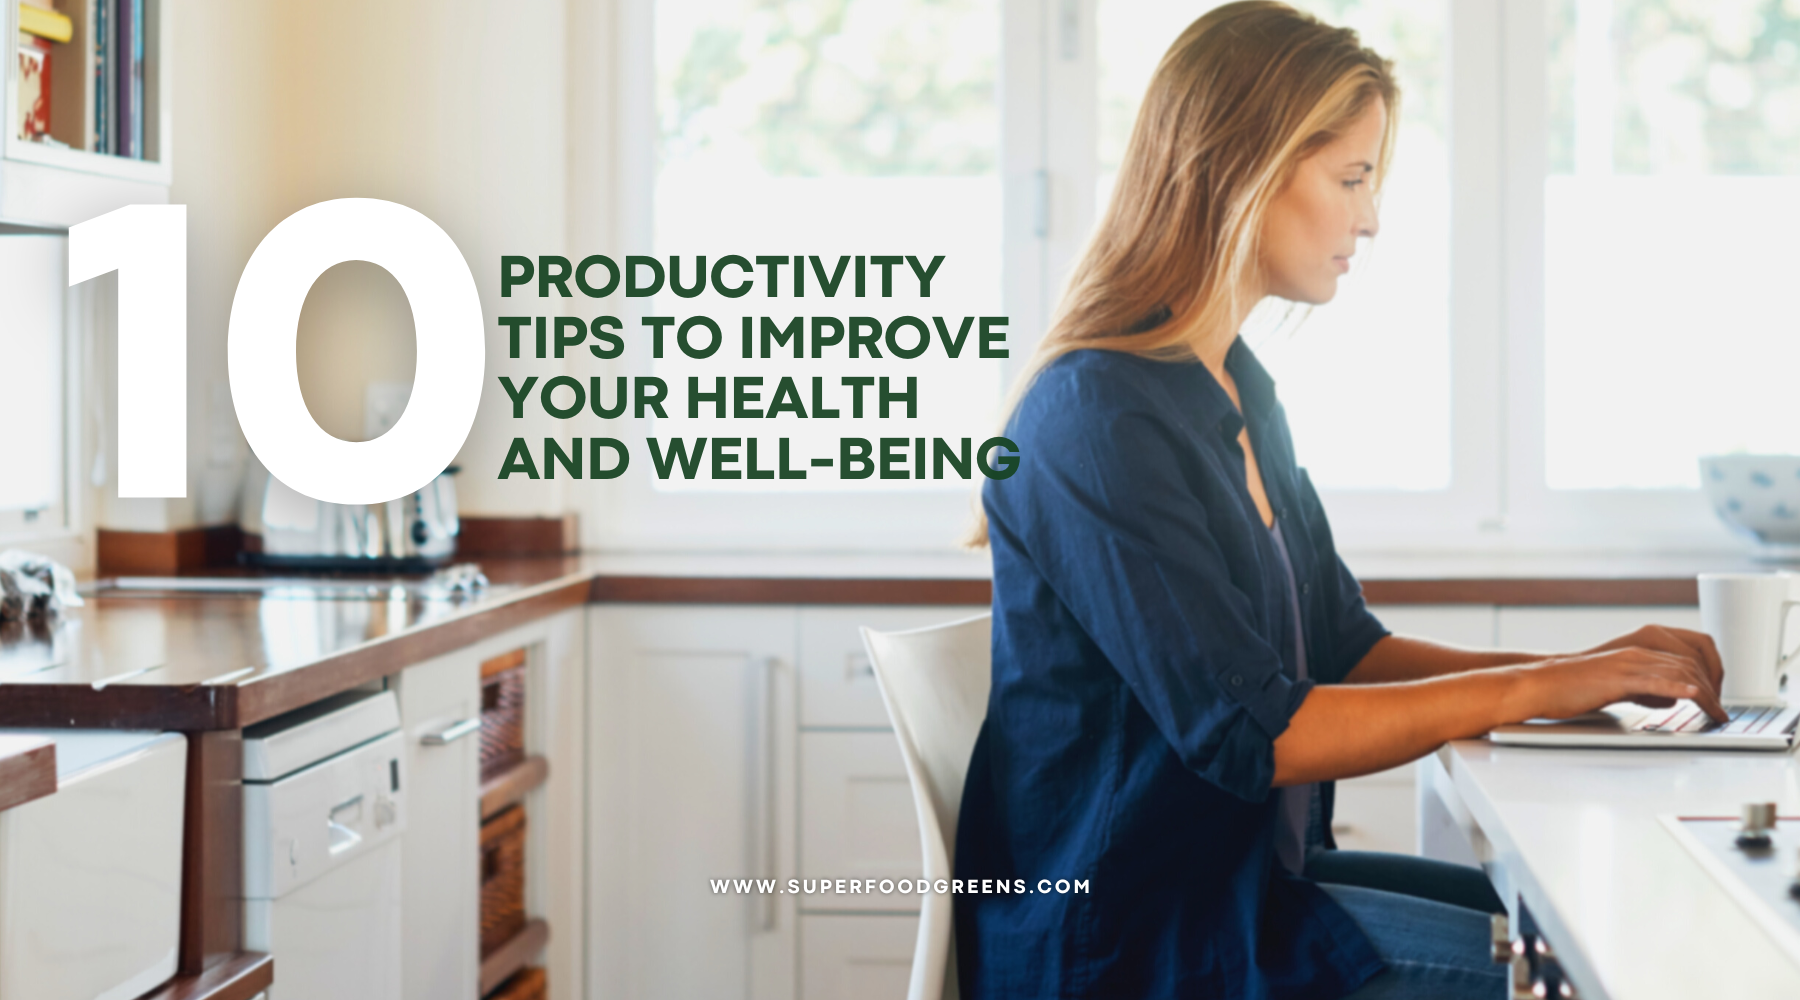  10 Productivity Tips to Improve Your Health and Well-Being | Superfood Greens